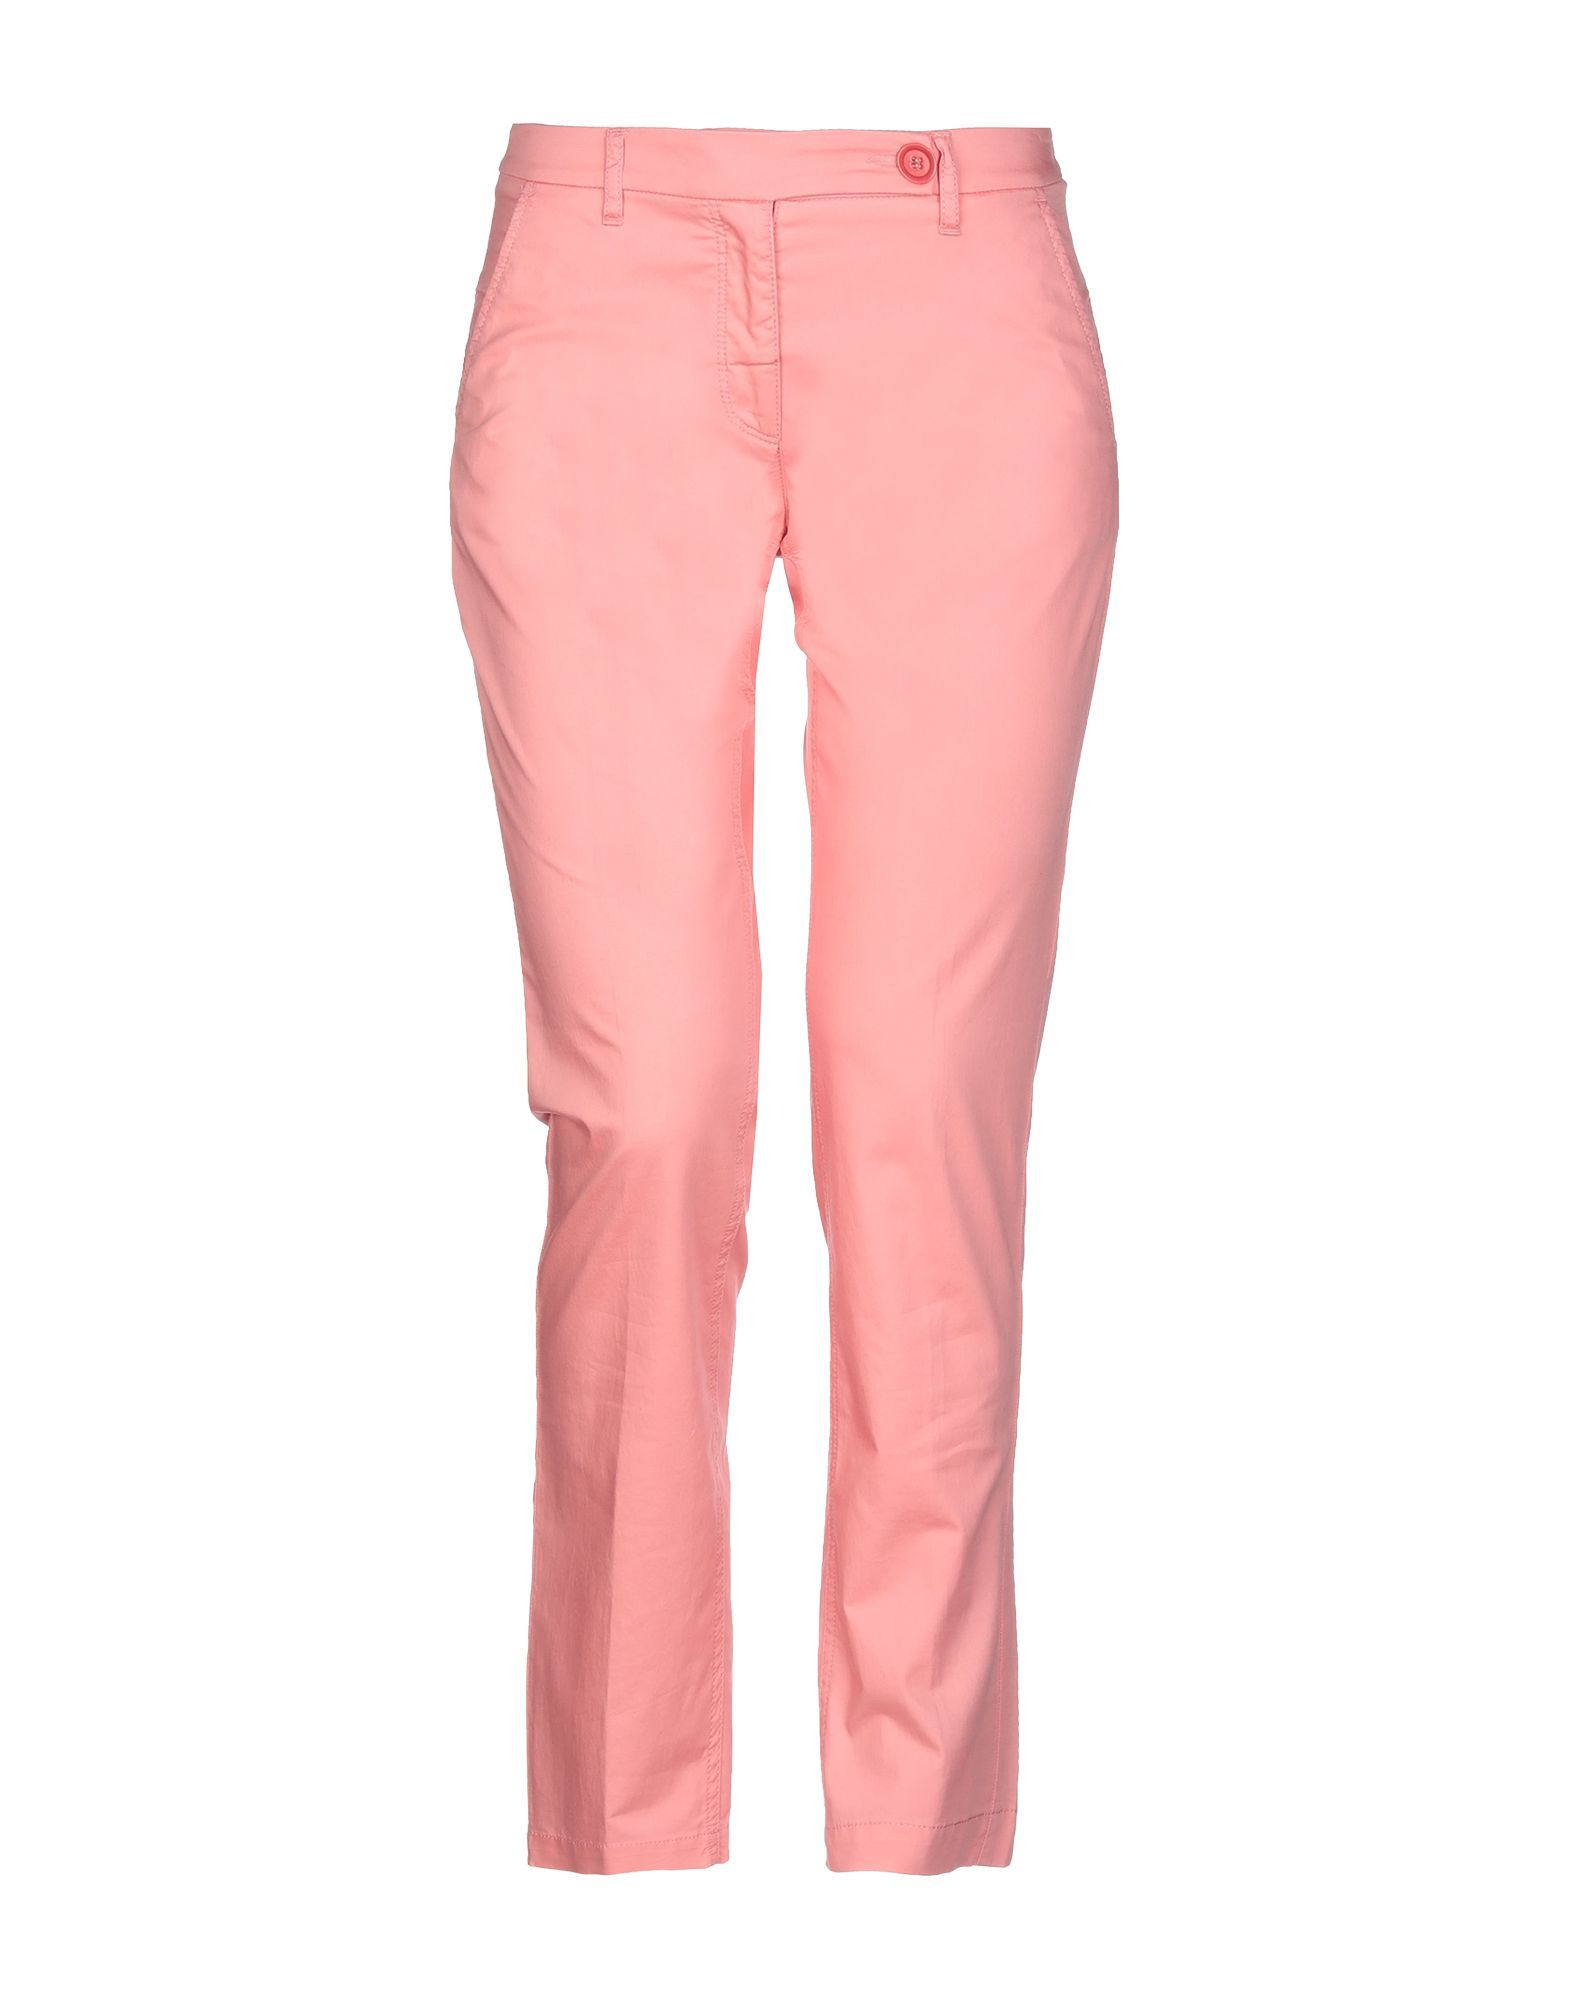 plain weave, no appliqués, basic solid colour, mid rise, regular fit, straight leg, button, zip, multipockets, stretch, chinos